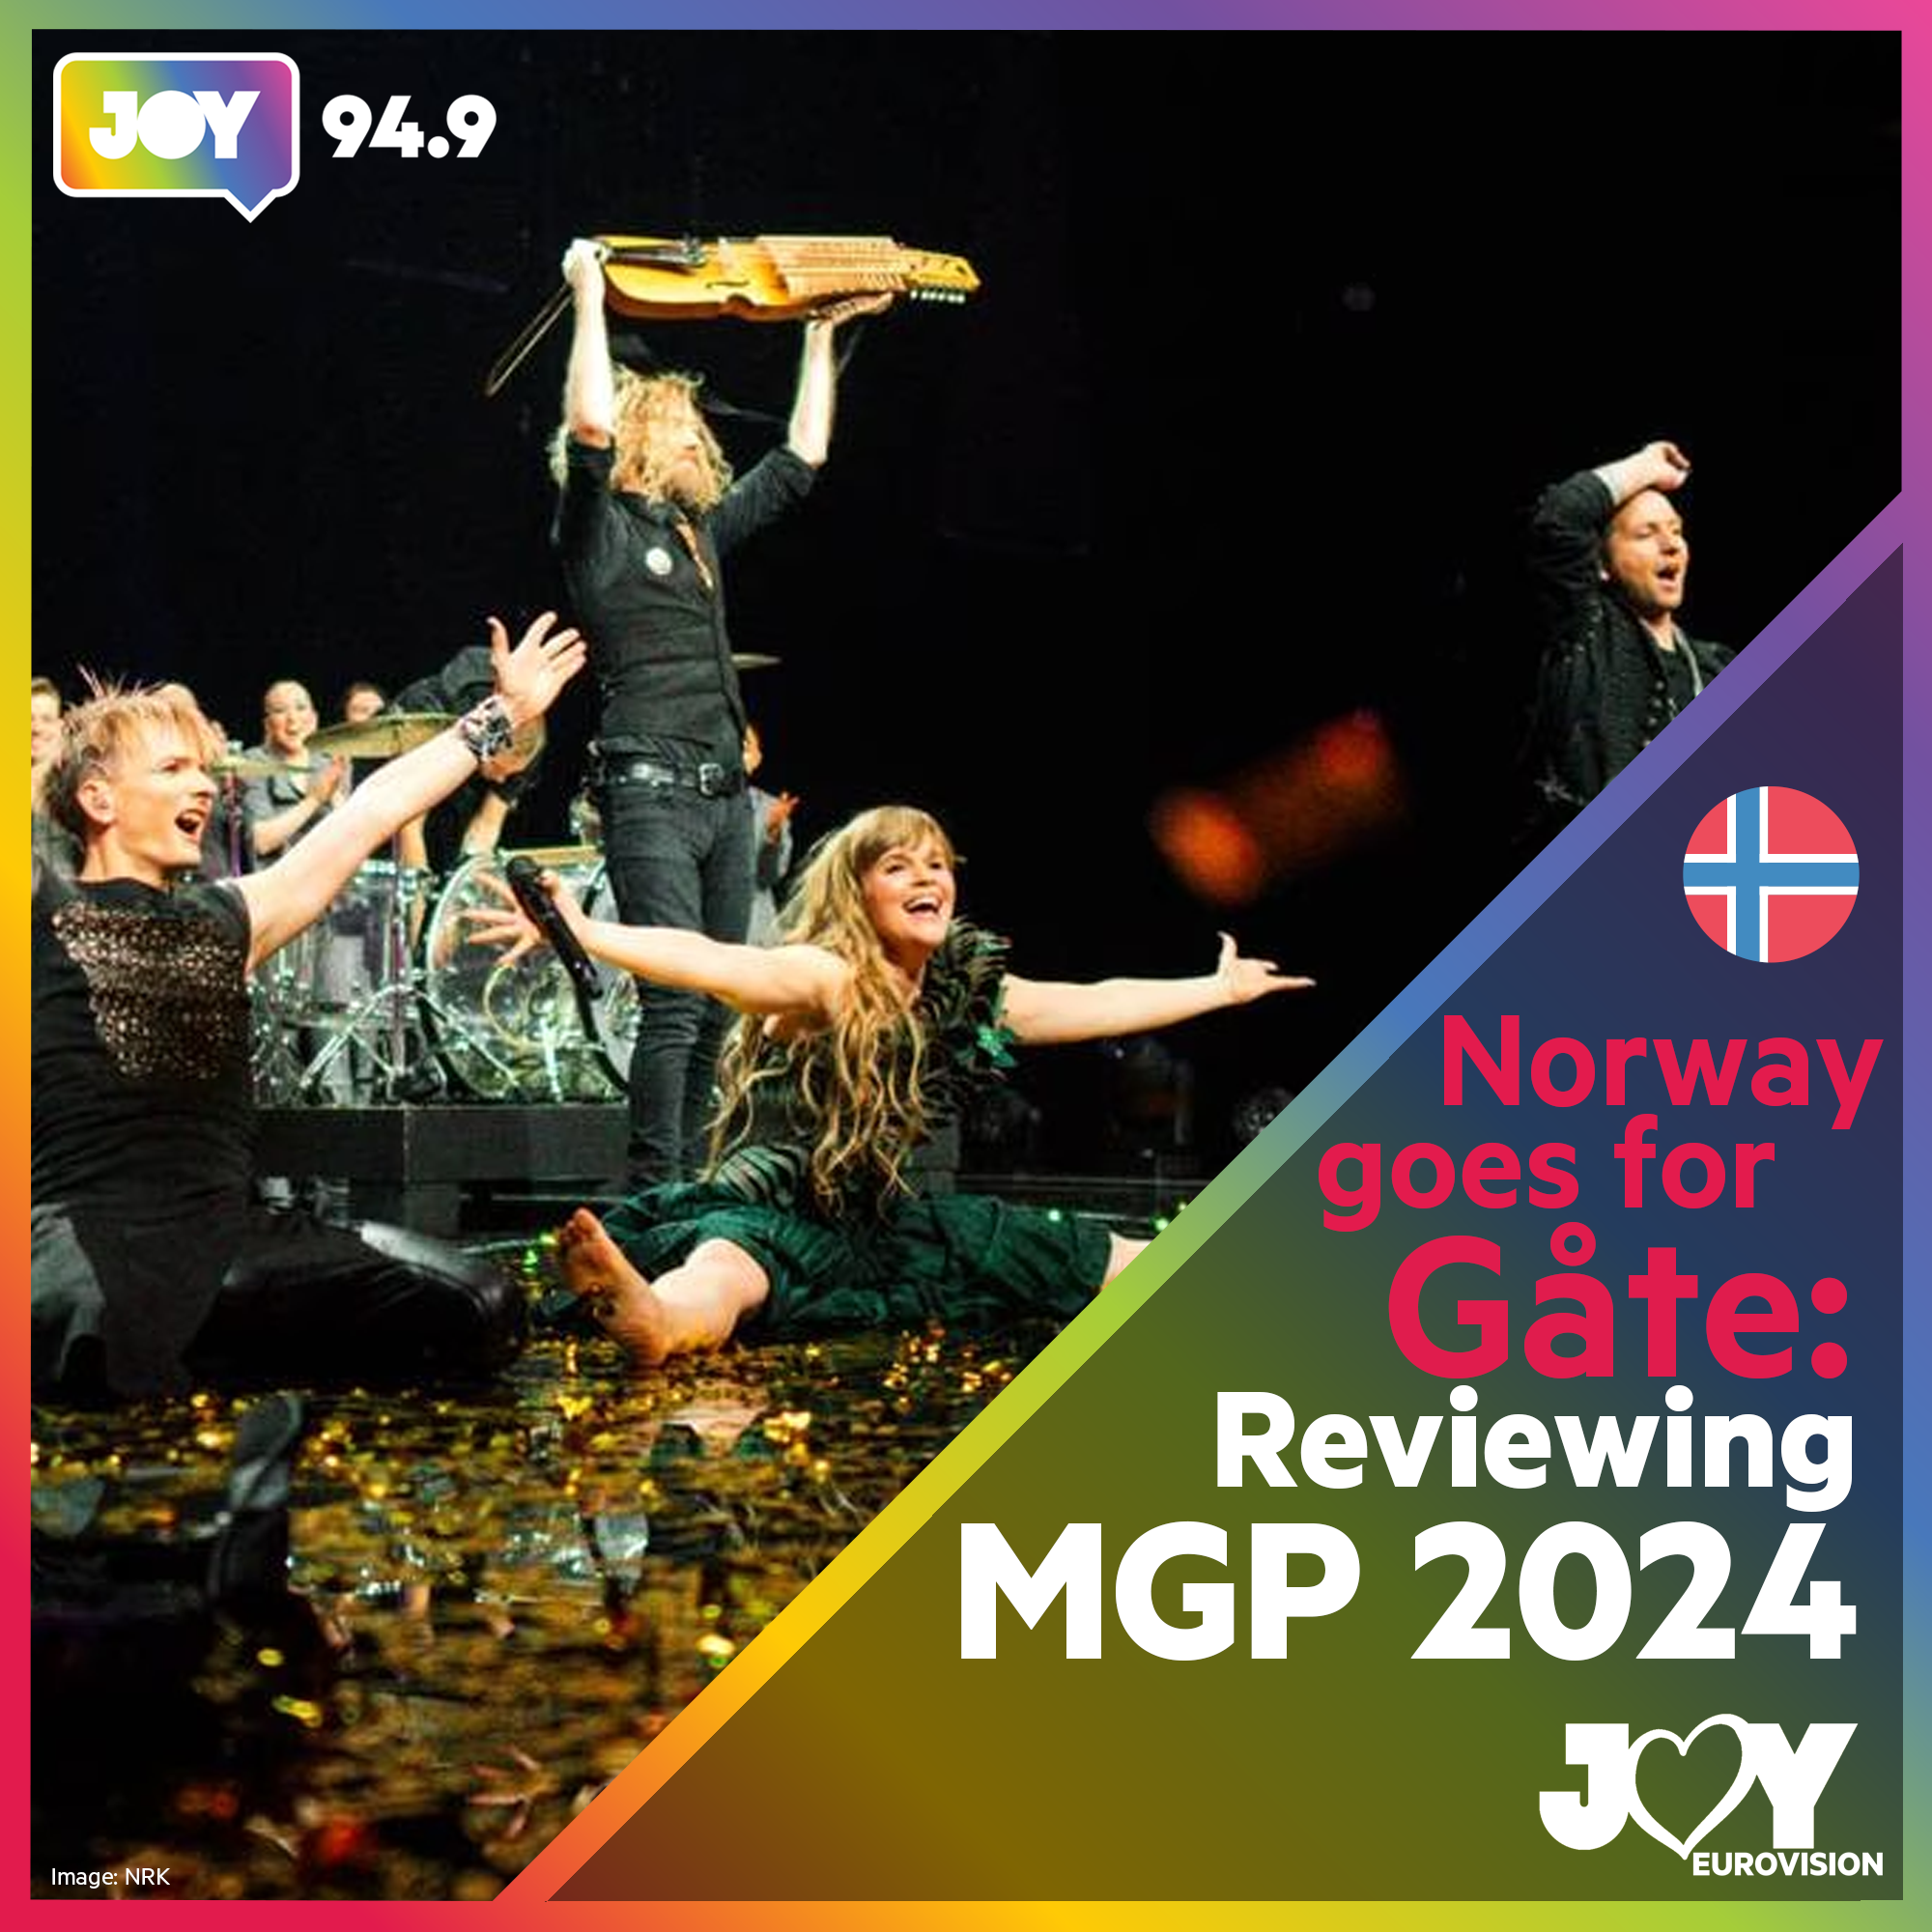 🇳🇴 Norway goes for Gåte: Reviewing MGP 2024